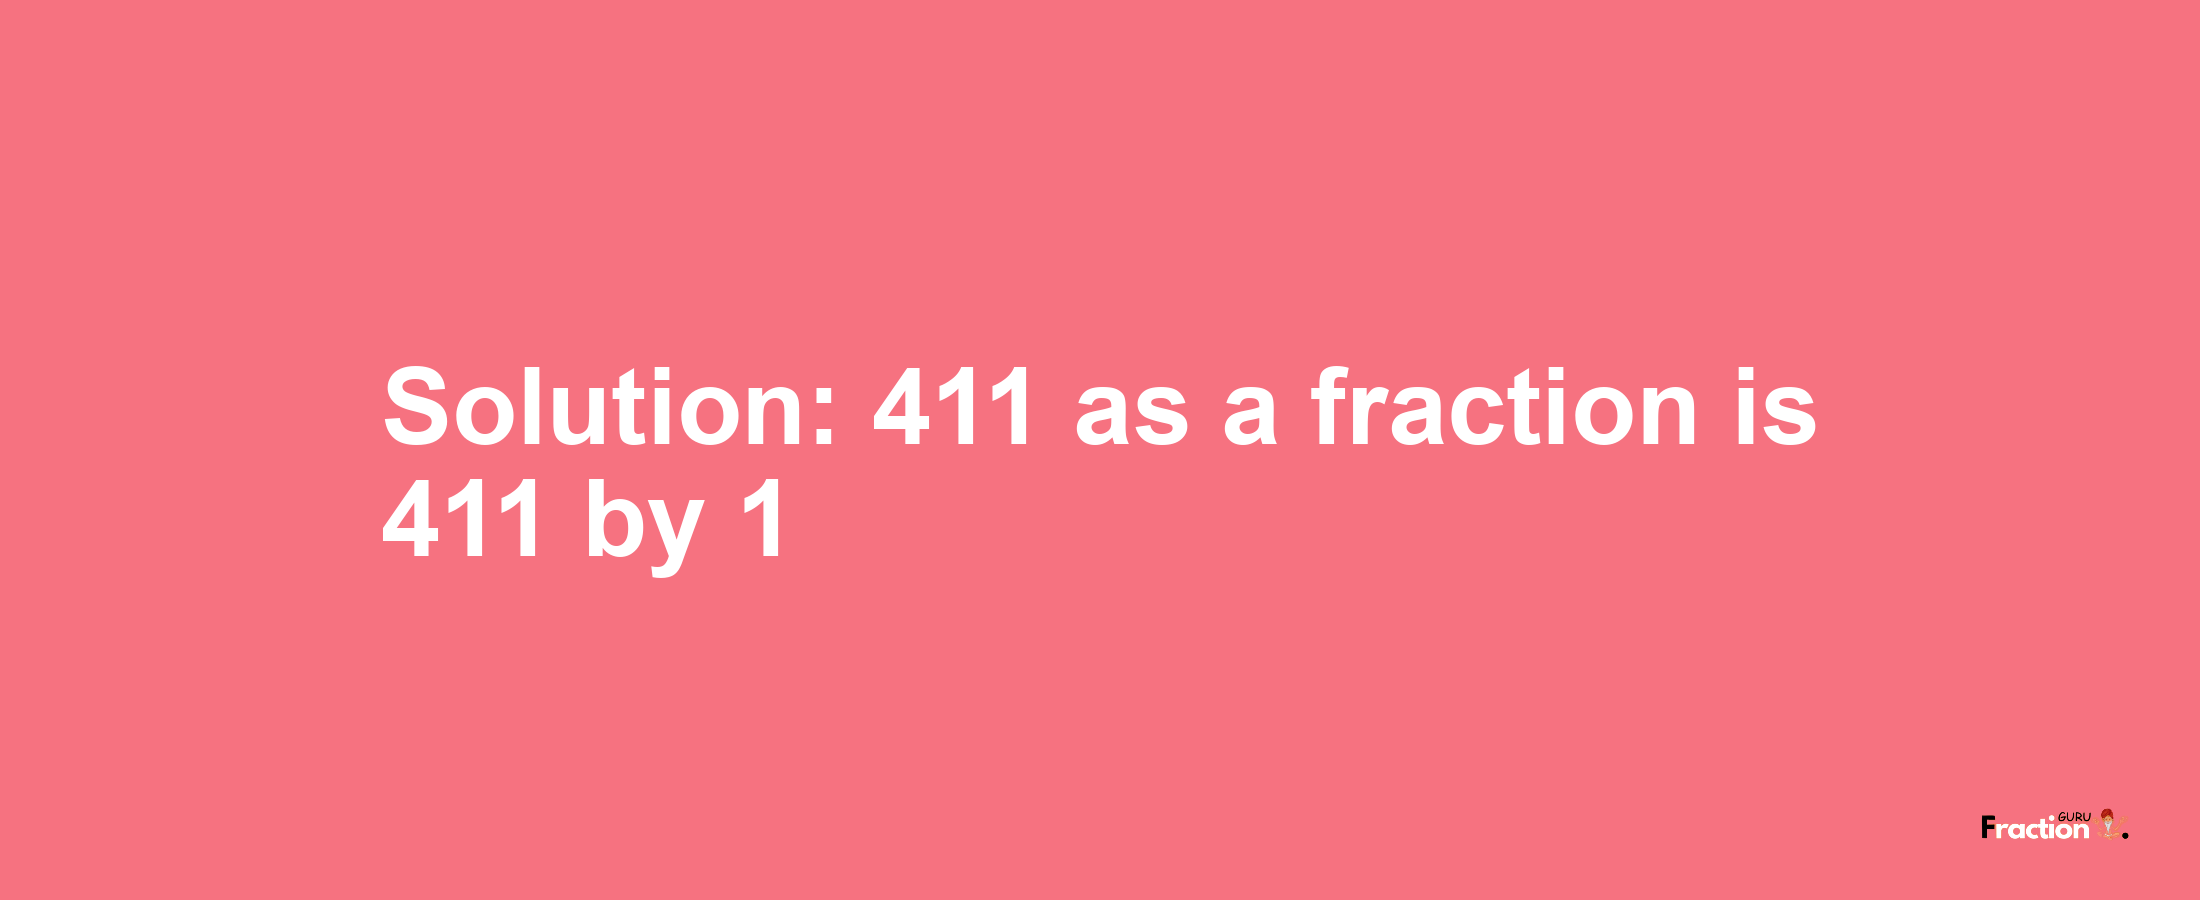 Solution:411 as a fraction is 411/1